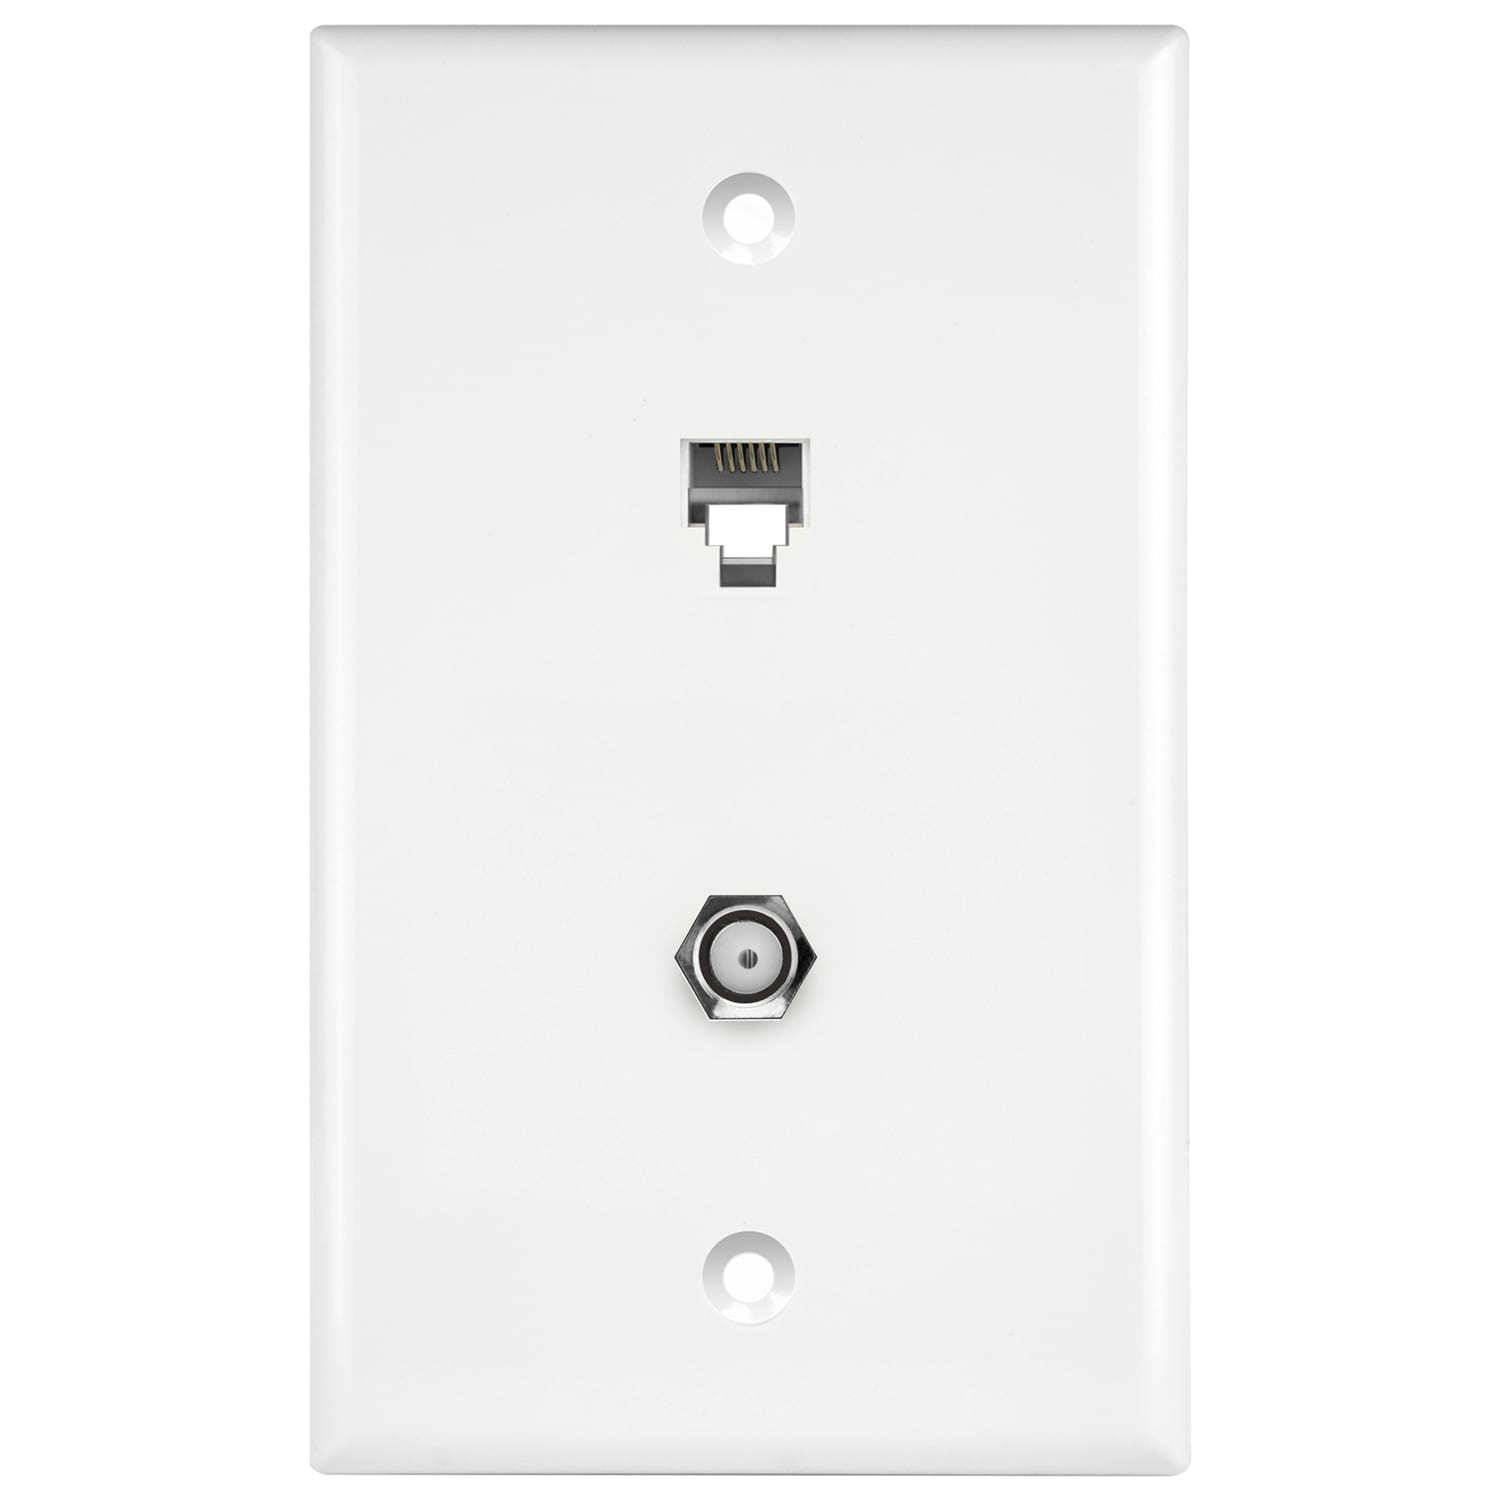 1-Gang RJ11 Telephone Jack 6P6C and F-Type Coaxial Cable Wall Plate